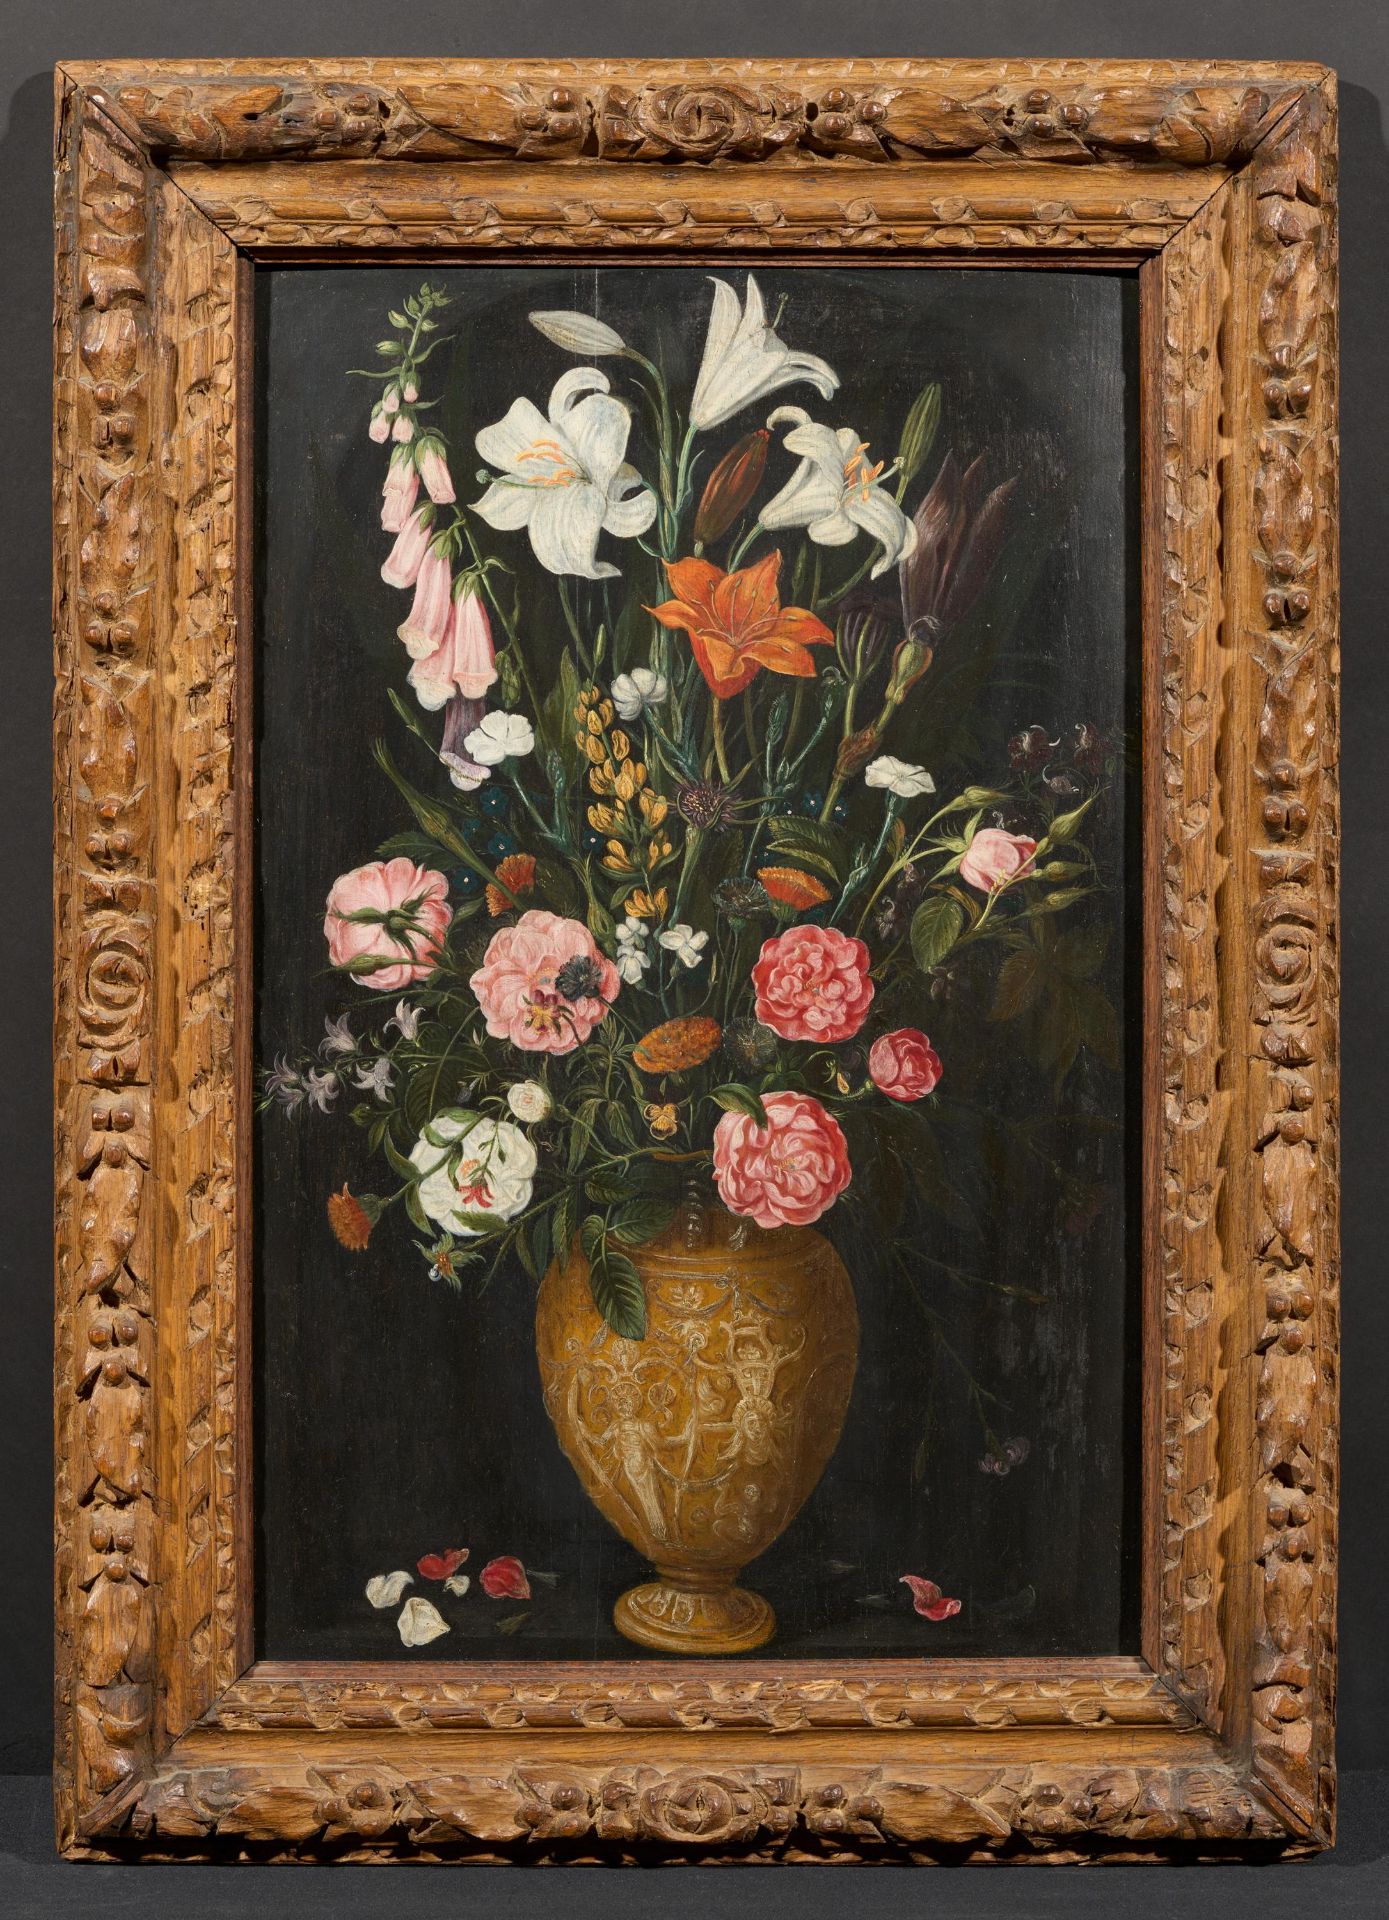 Flemish School: Roses and Lilies in a Vase - Image 2 of 4